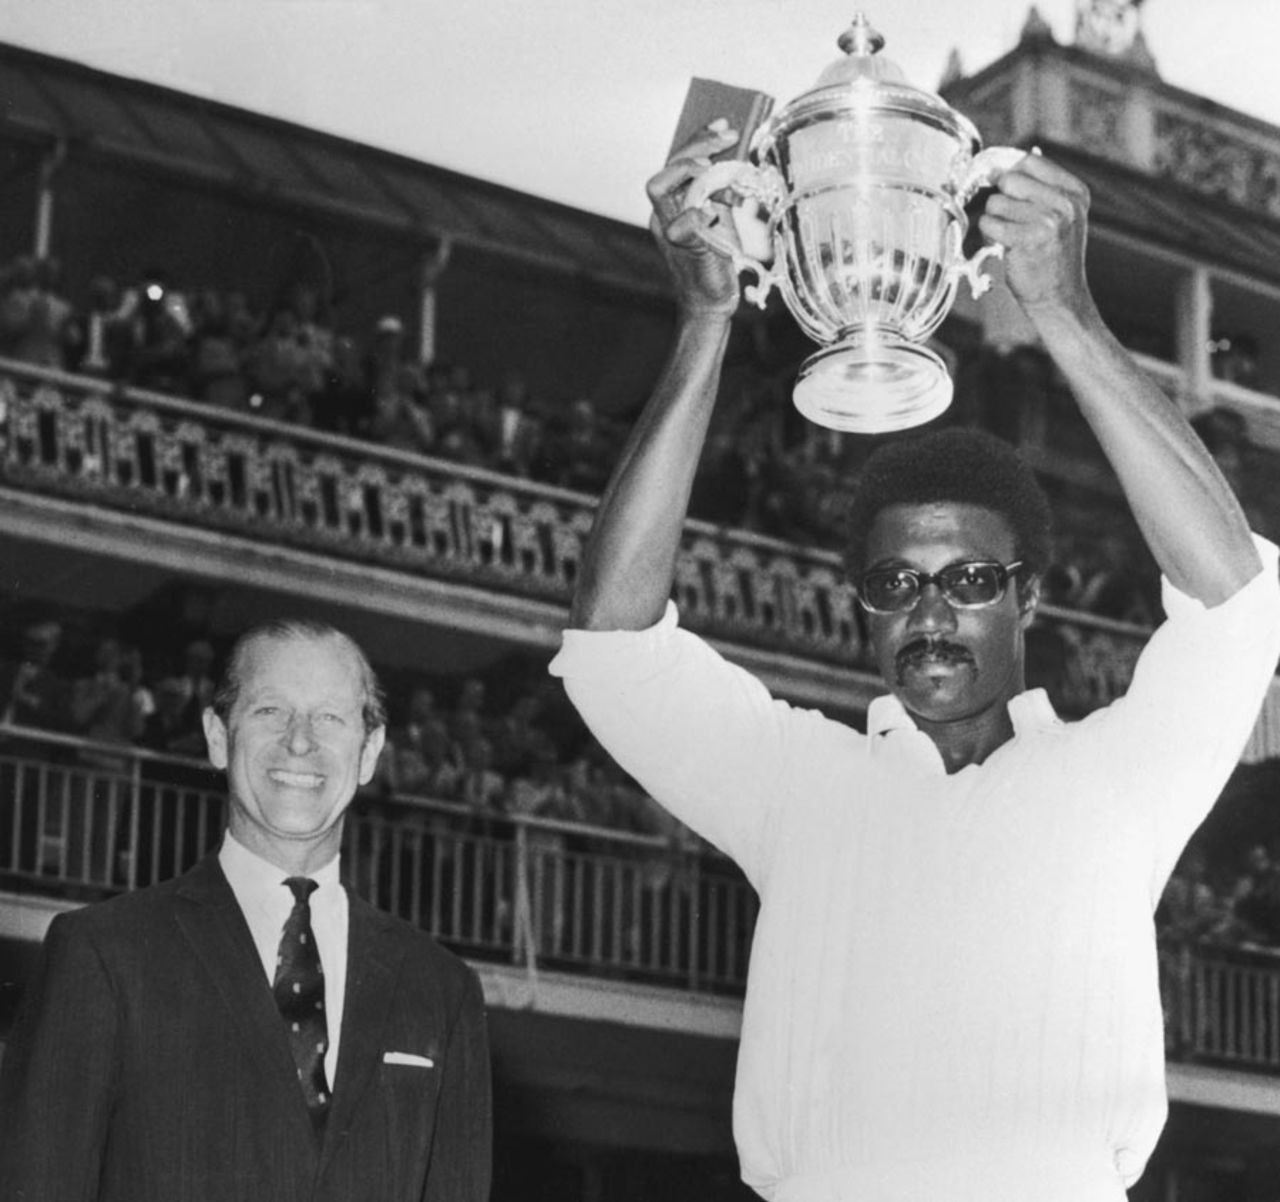 Clive Lloyd holds the World Cup after West Indies win, West Indies v Australia, Lord's, June 21, 1975